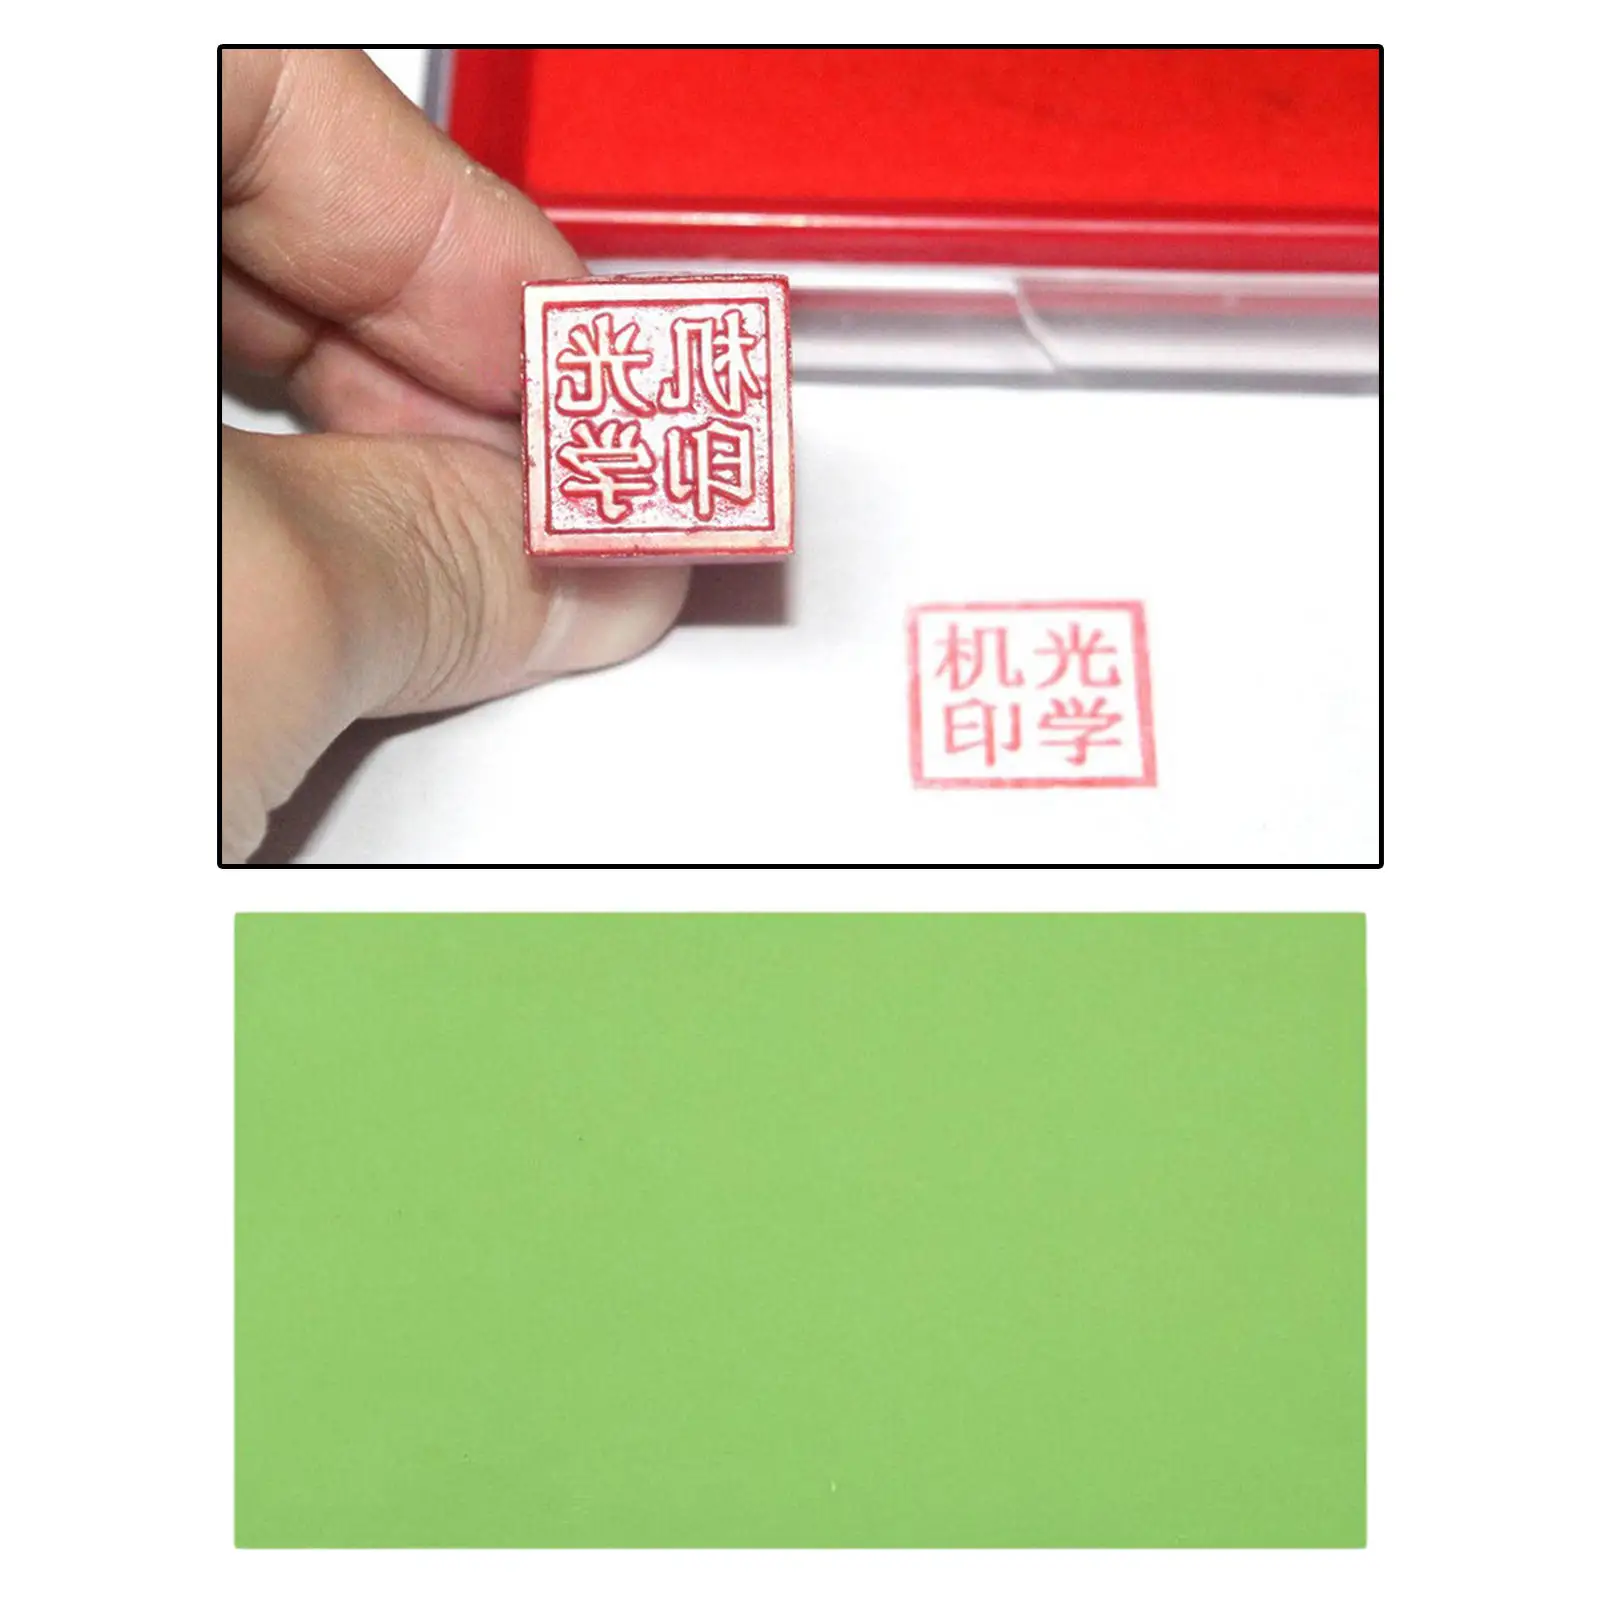 Solid Photopolymer Plate Water Soluble Resin Stamp Making Home Stamp Sheet